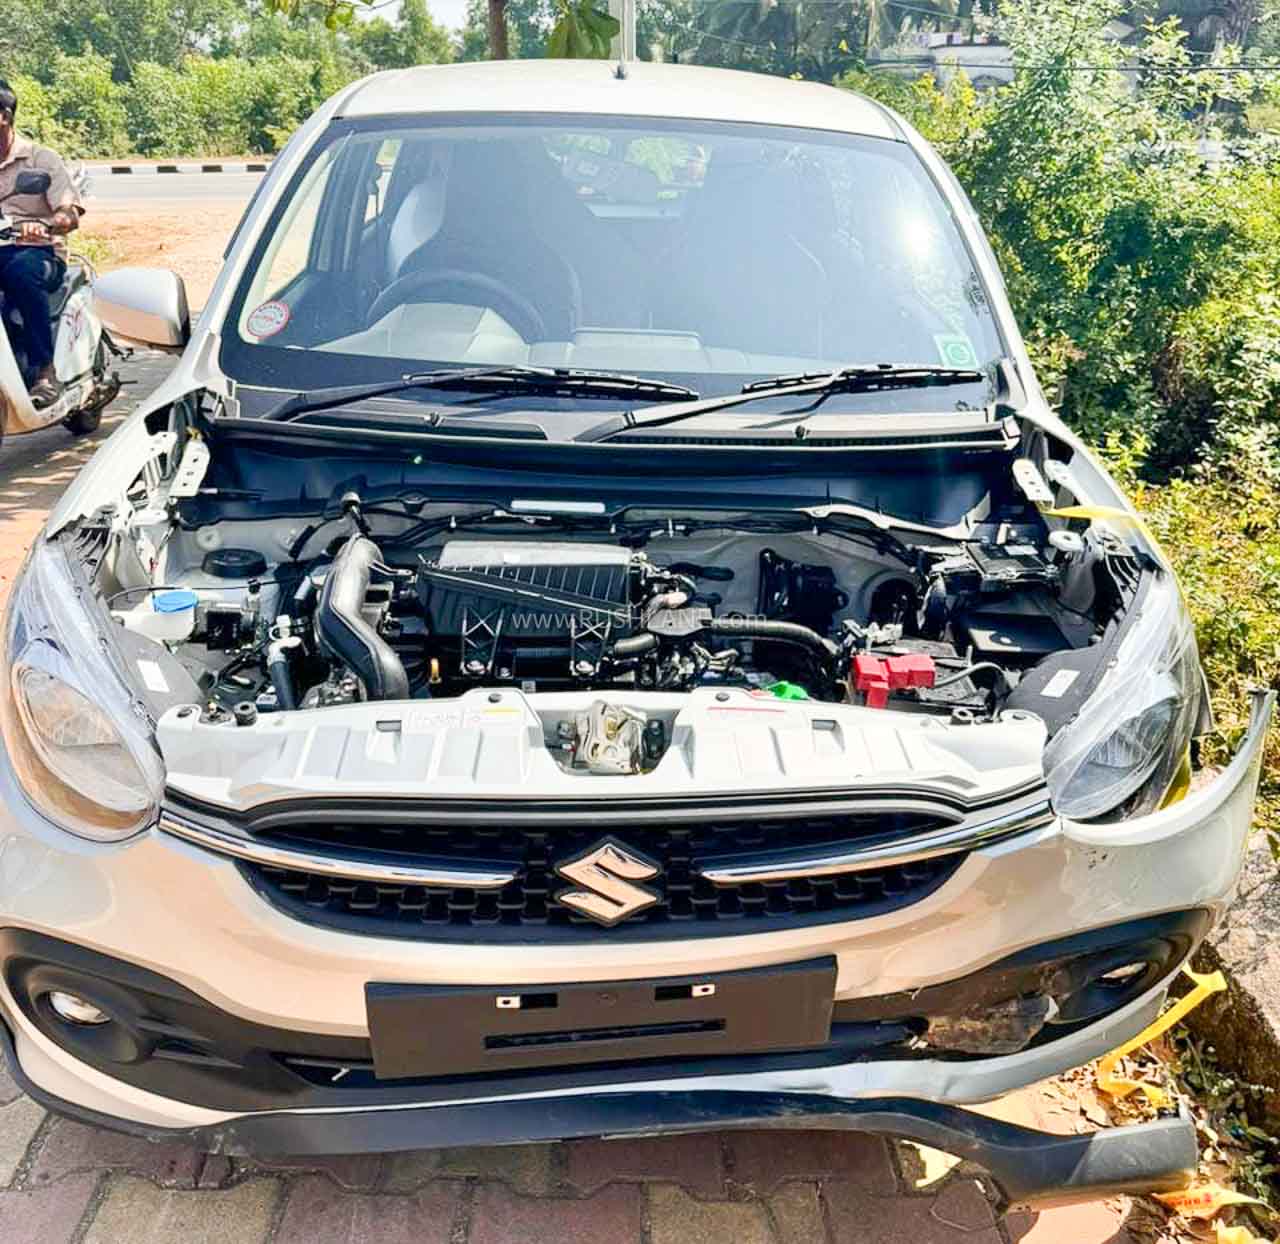 New Maruti Celerio delivery gone wrong